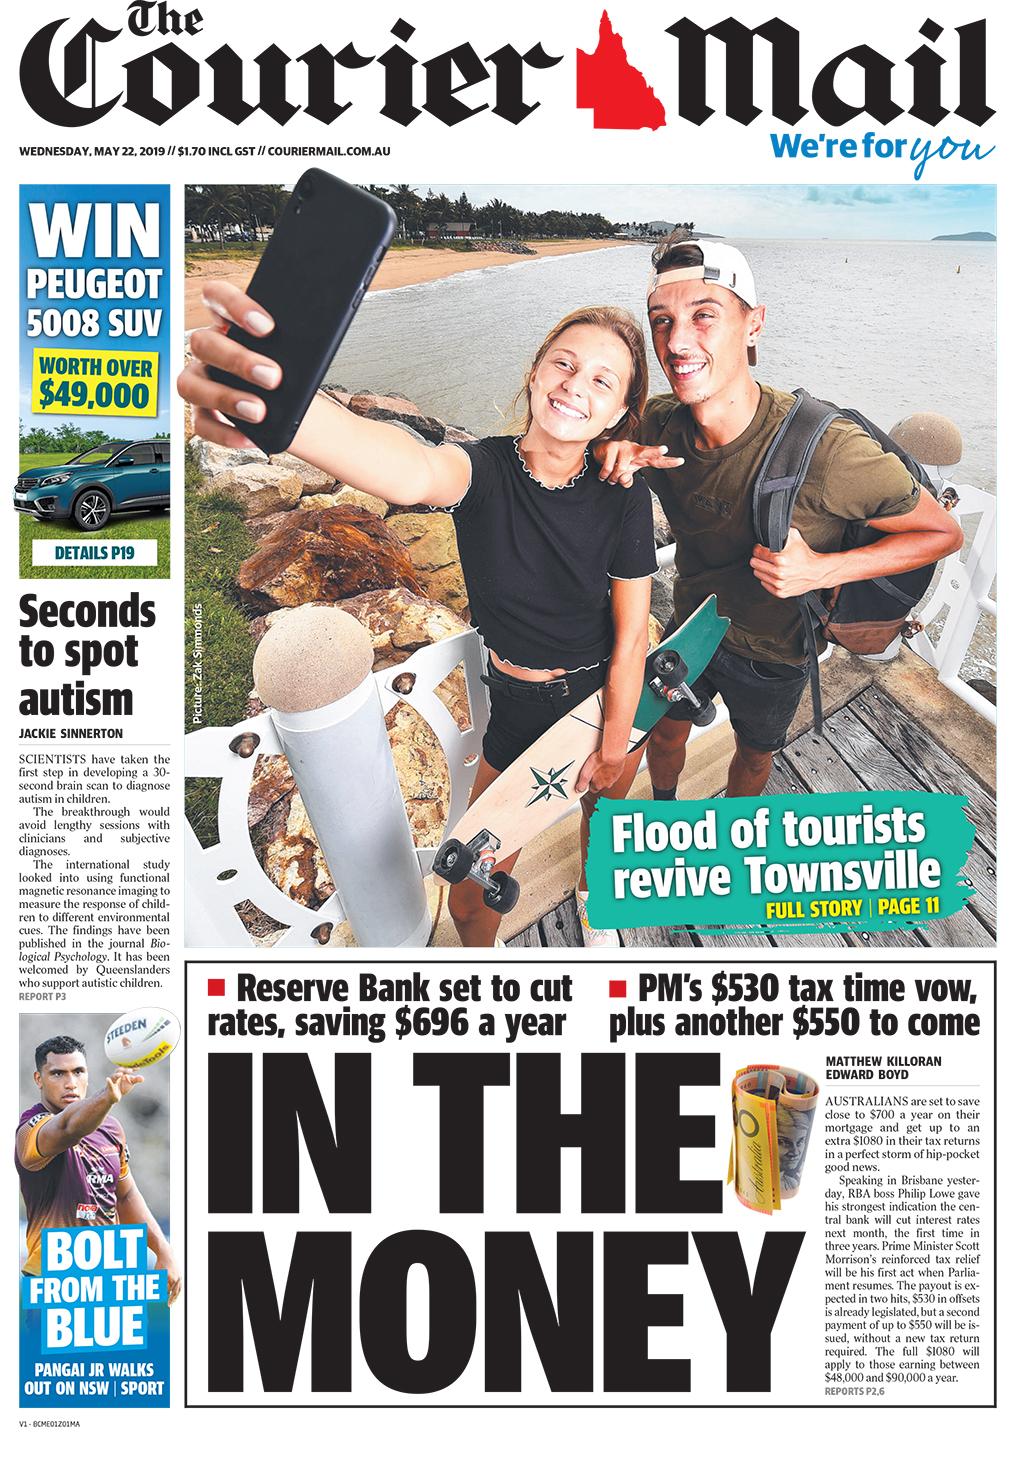 Postelection boost to Aussies’ hip pockets The Courier Mail